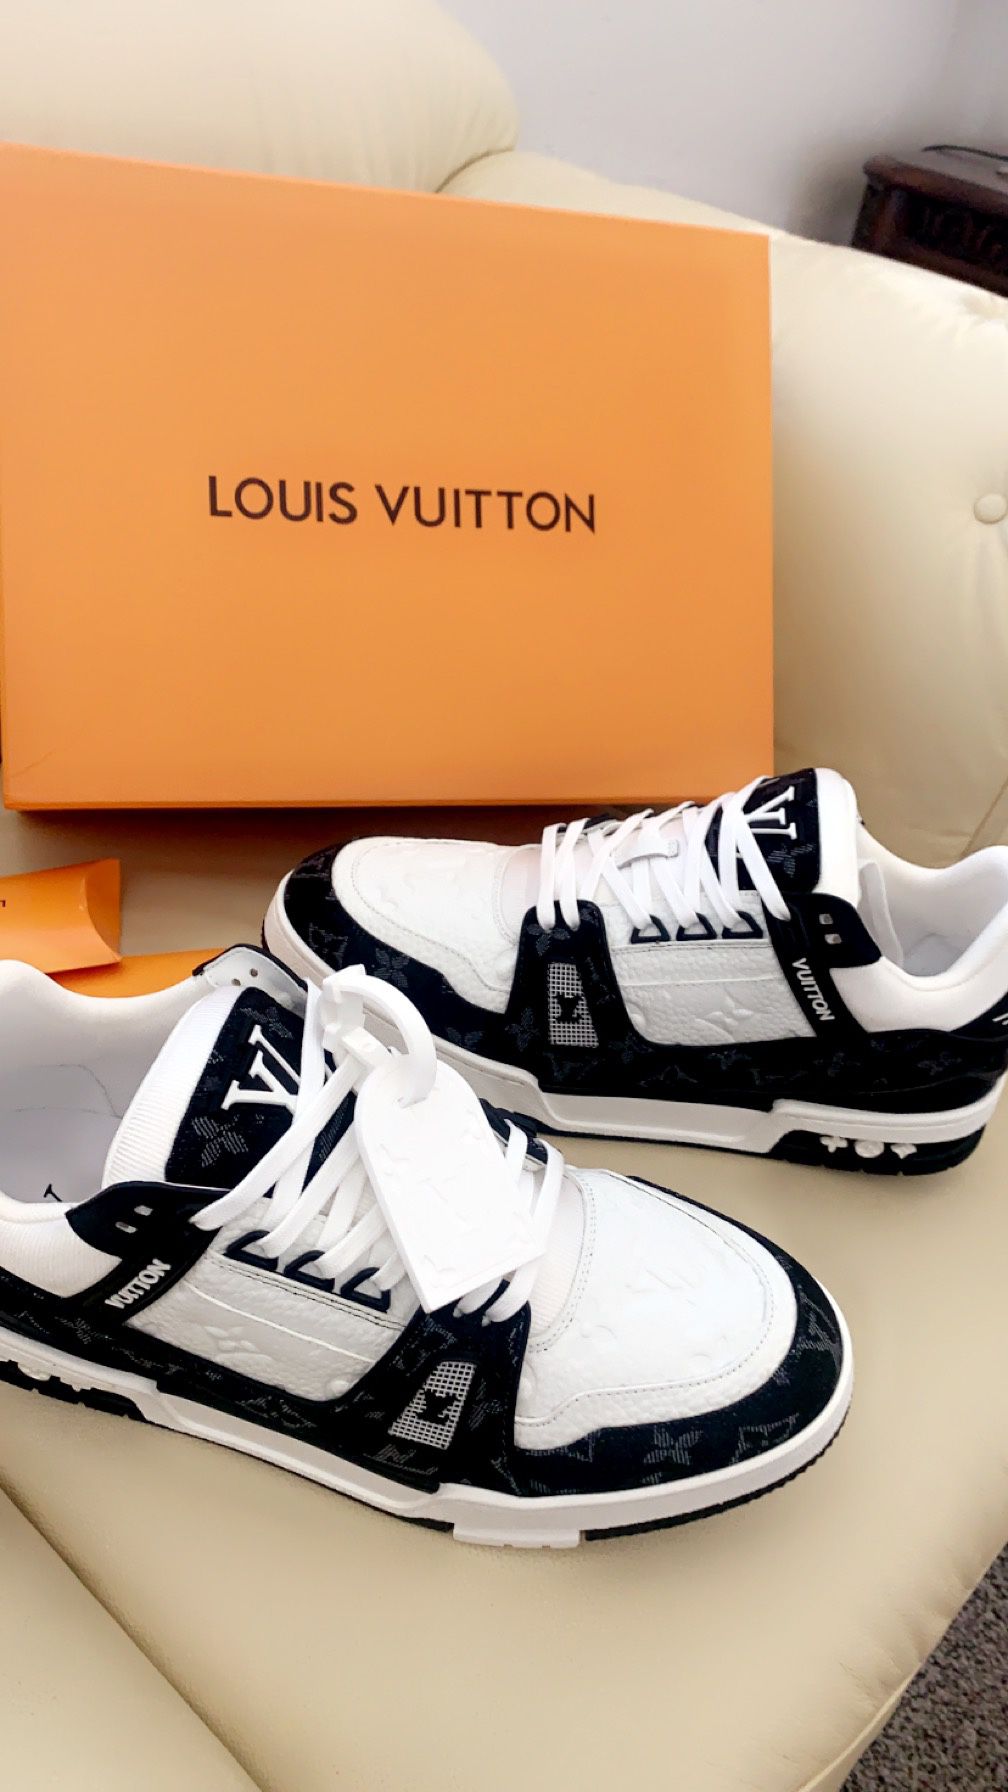 Louis Vuitton Sneakers Size 37 USA Size 7 for Sale in San Juan, TX - OfferUp